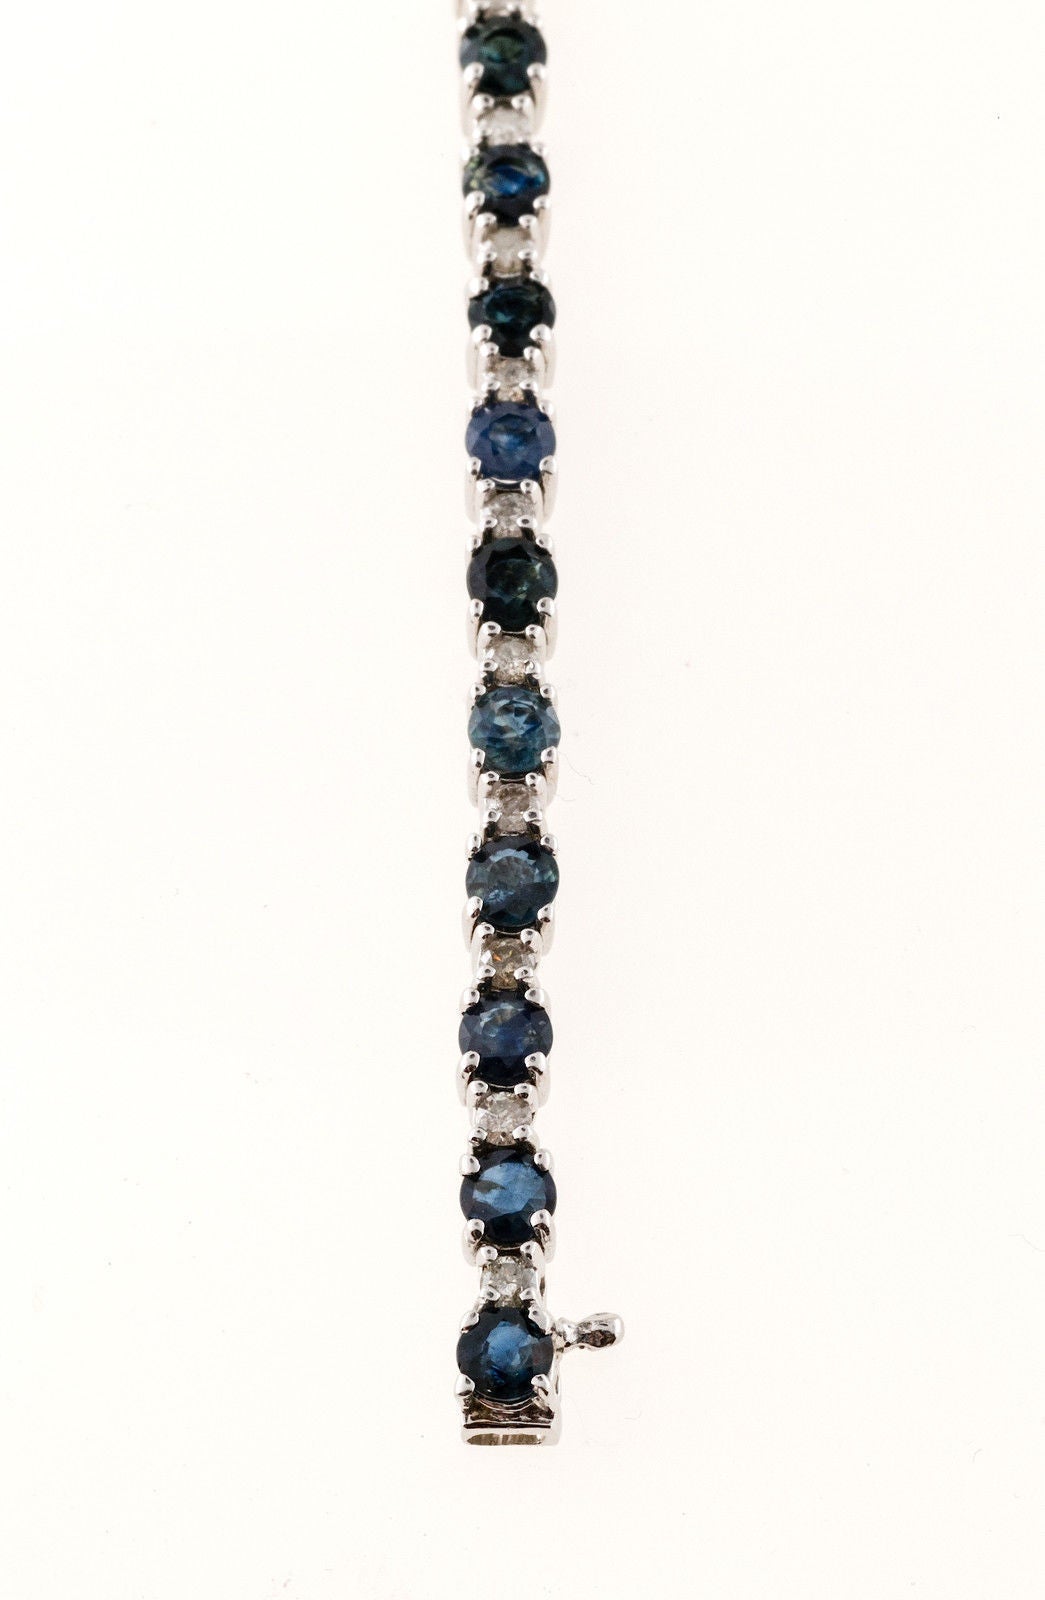 Hinged link 14k white gold bracelet with deep blue Sapphires and white diamonds.

26 diamonds approximately .03ct each, approximately .75ct total, H, SI2-I1
26 oval Sapphires 4 x 3.5mm approx. total weight 6.50cts
Stamped: 14k
Built in catch